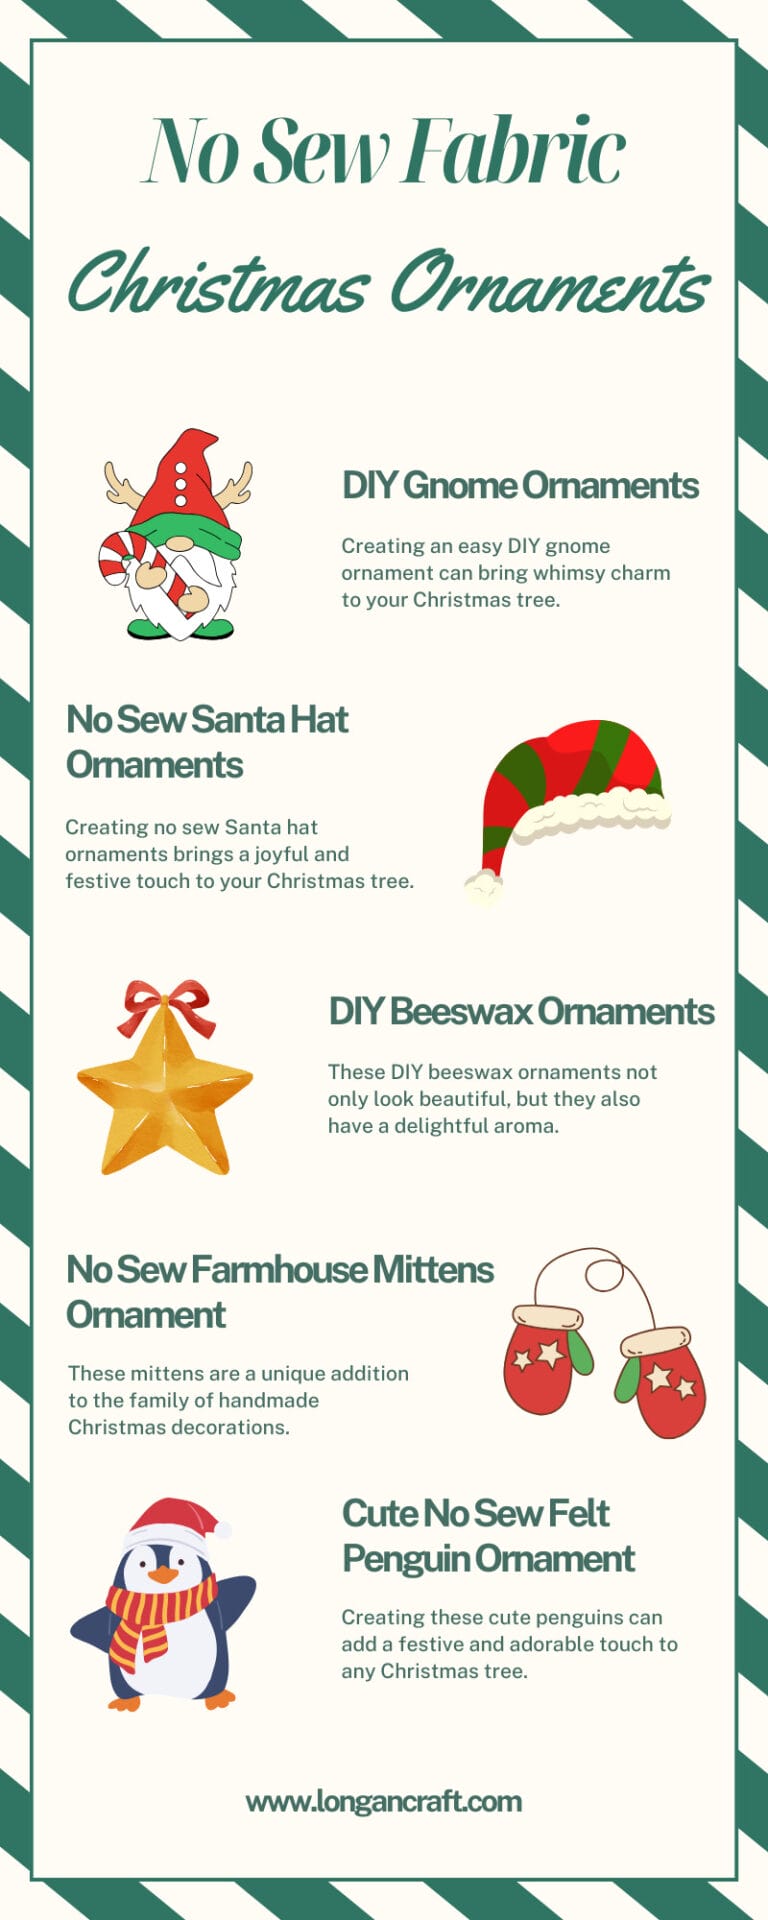 An infographic of 5 no sew fabric Christmas ornaments